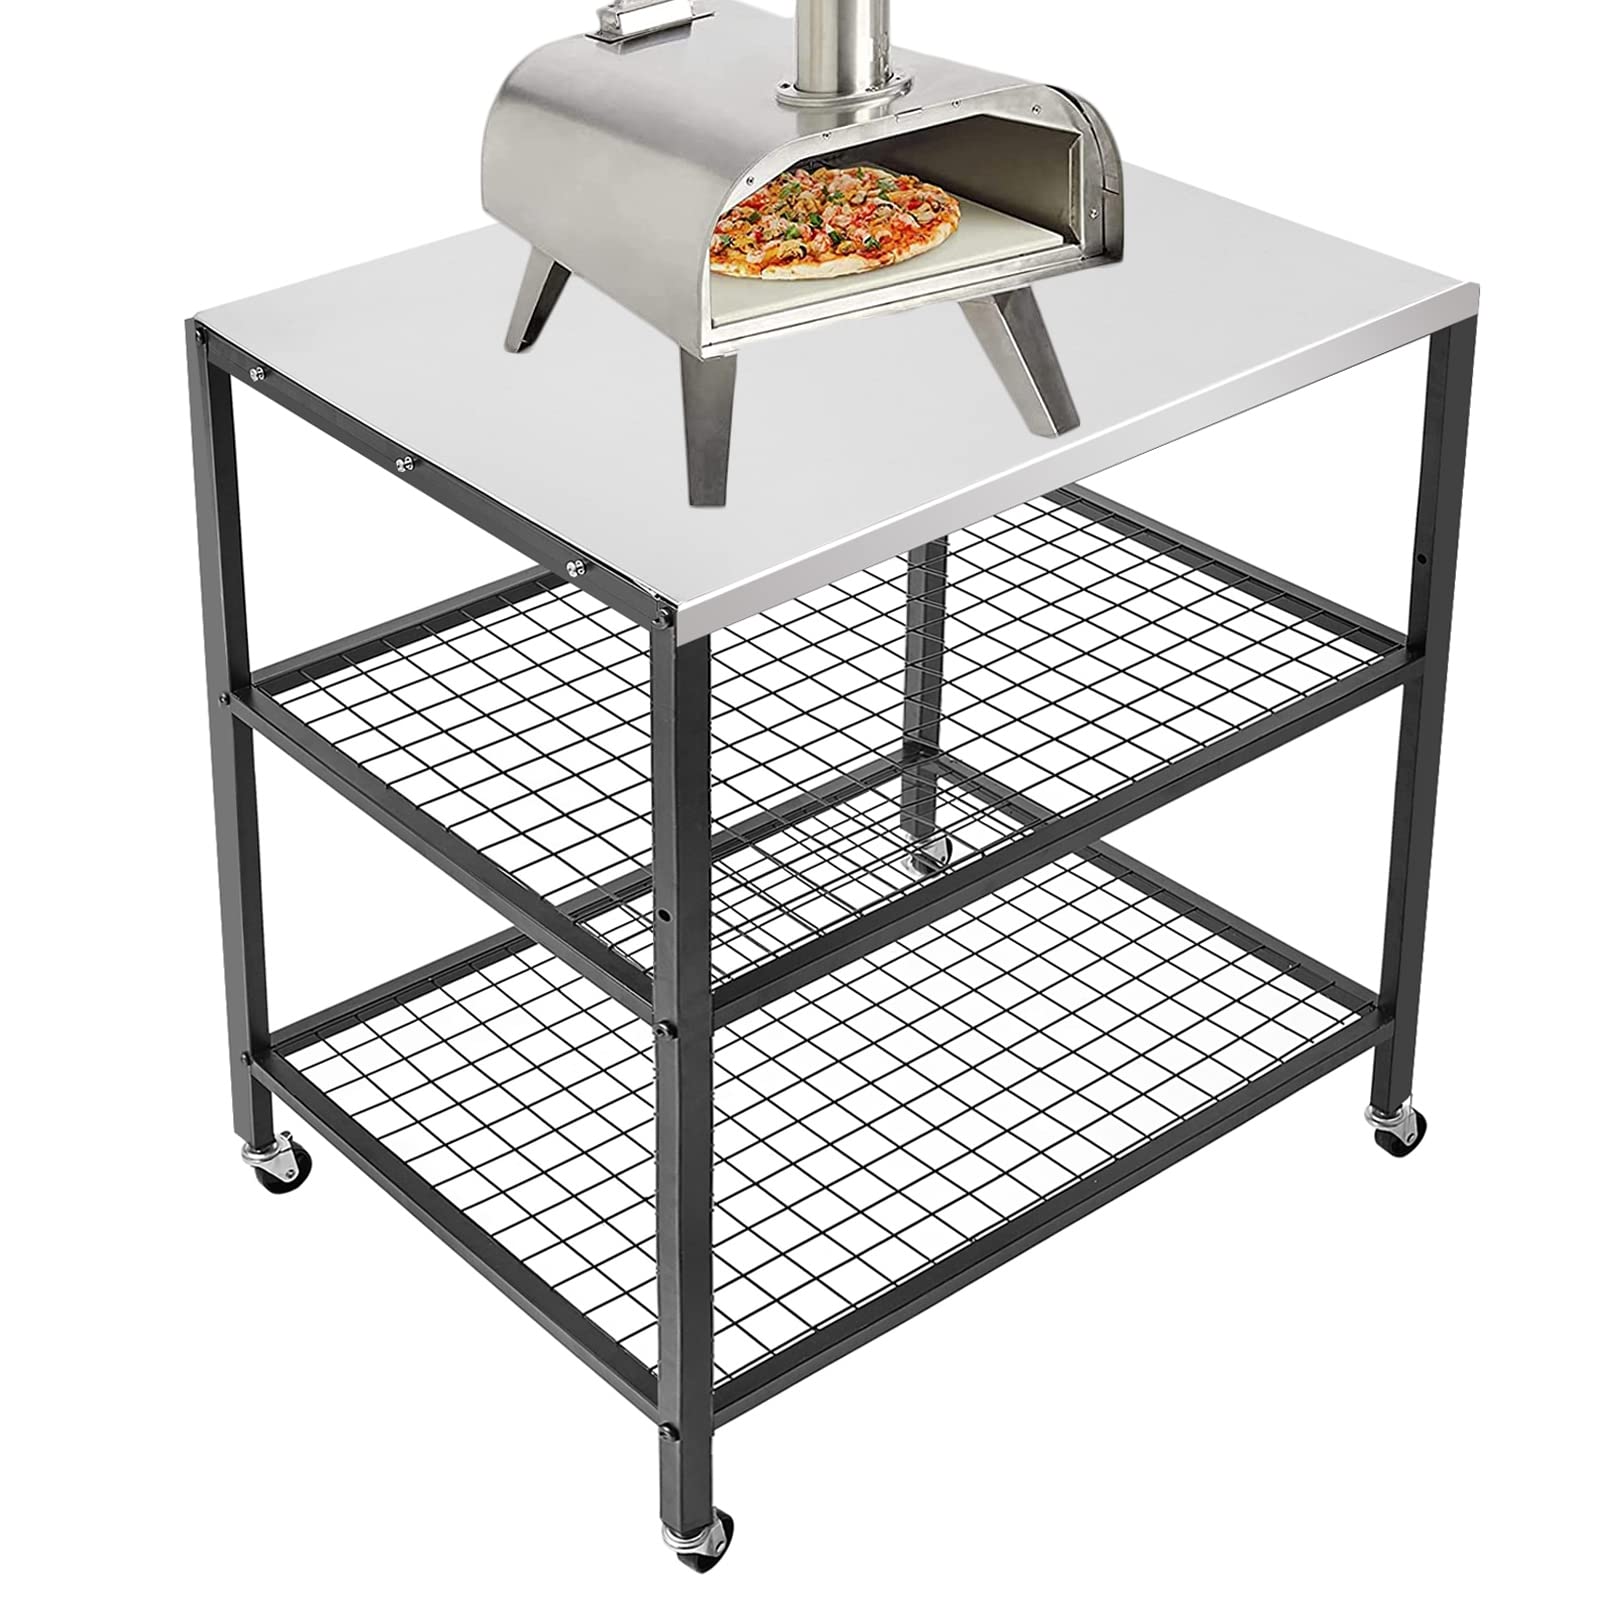 Weashume Three-Shelf Movable Food Prep And Work Cart Table Stainless Steel Grill Cart Modular Table With Wheels Commercial Kitch